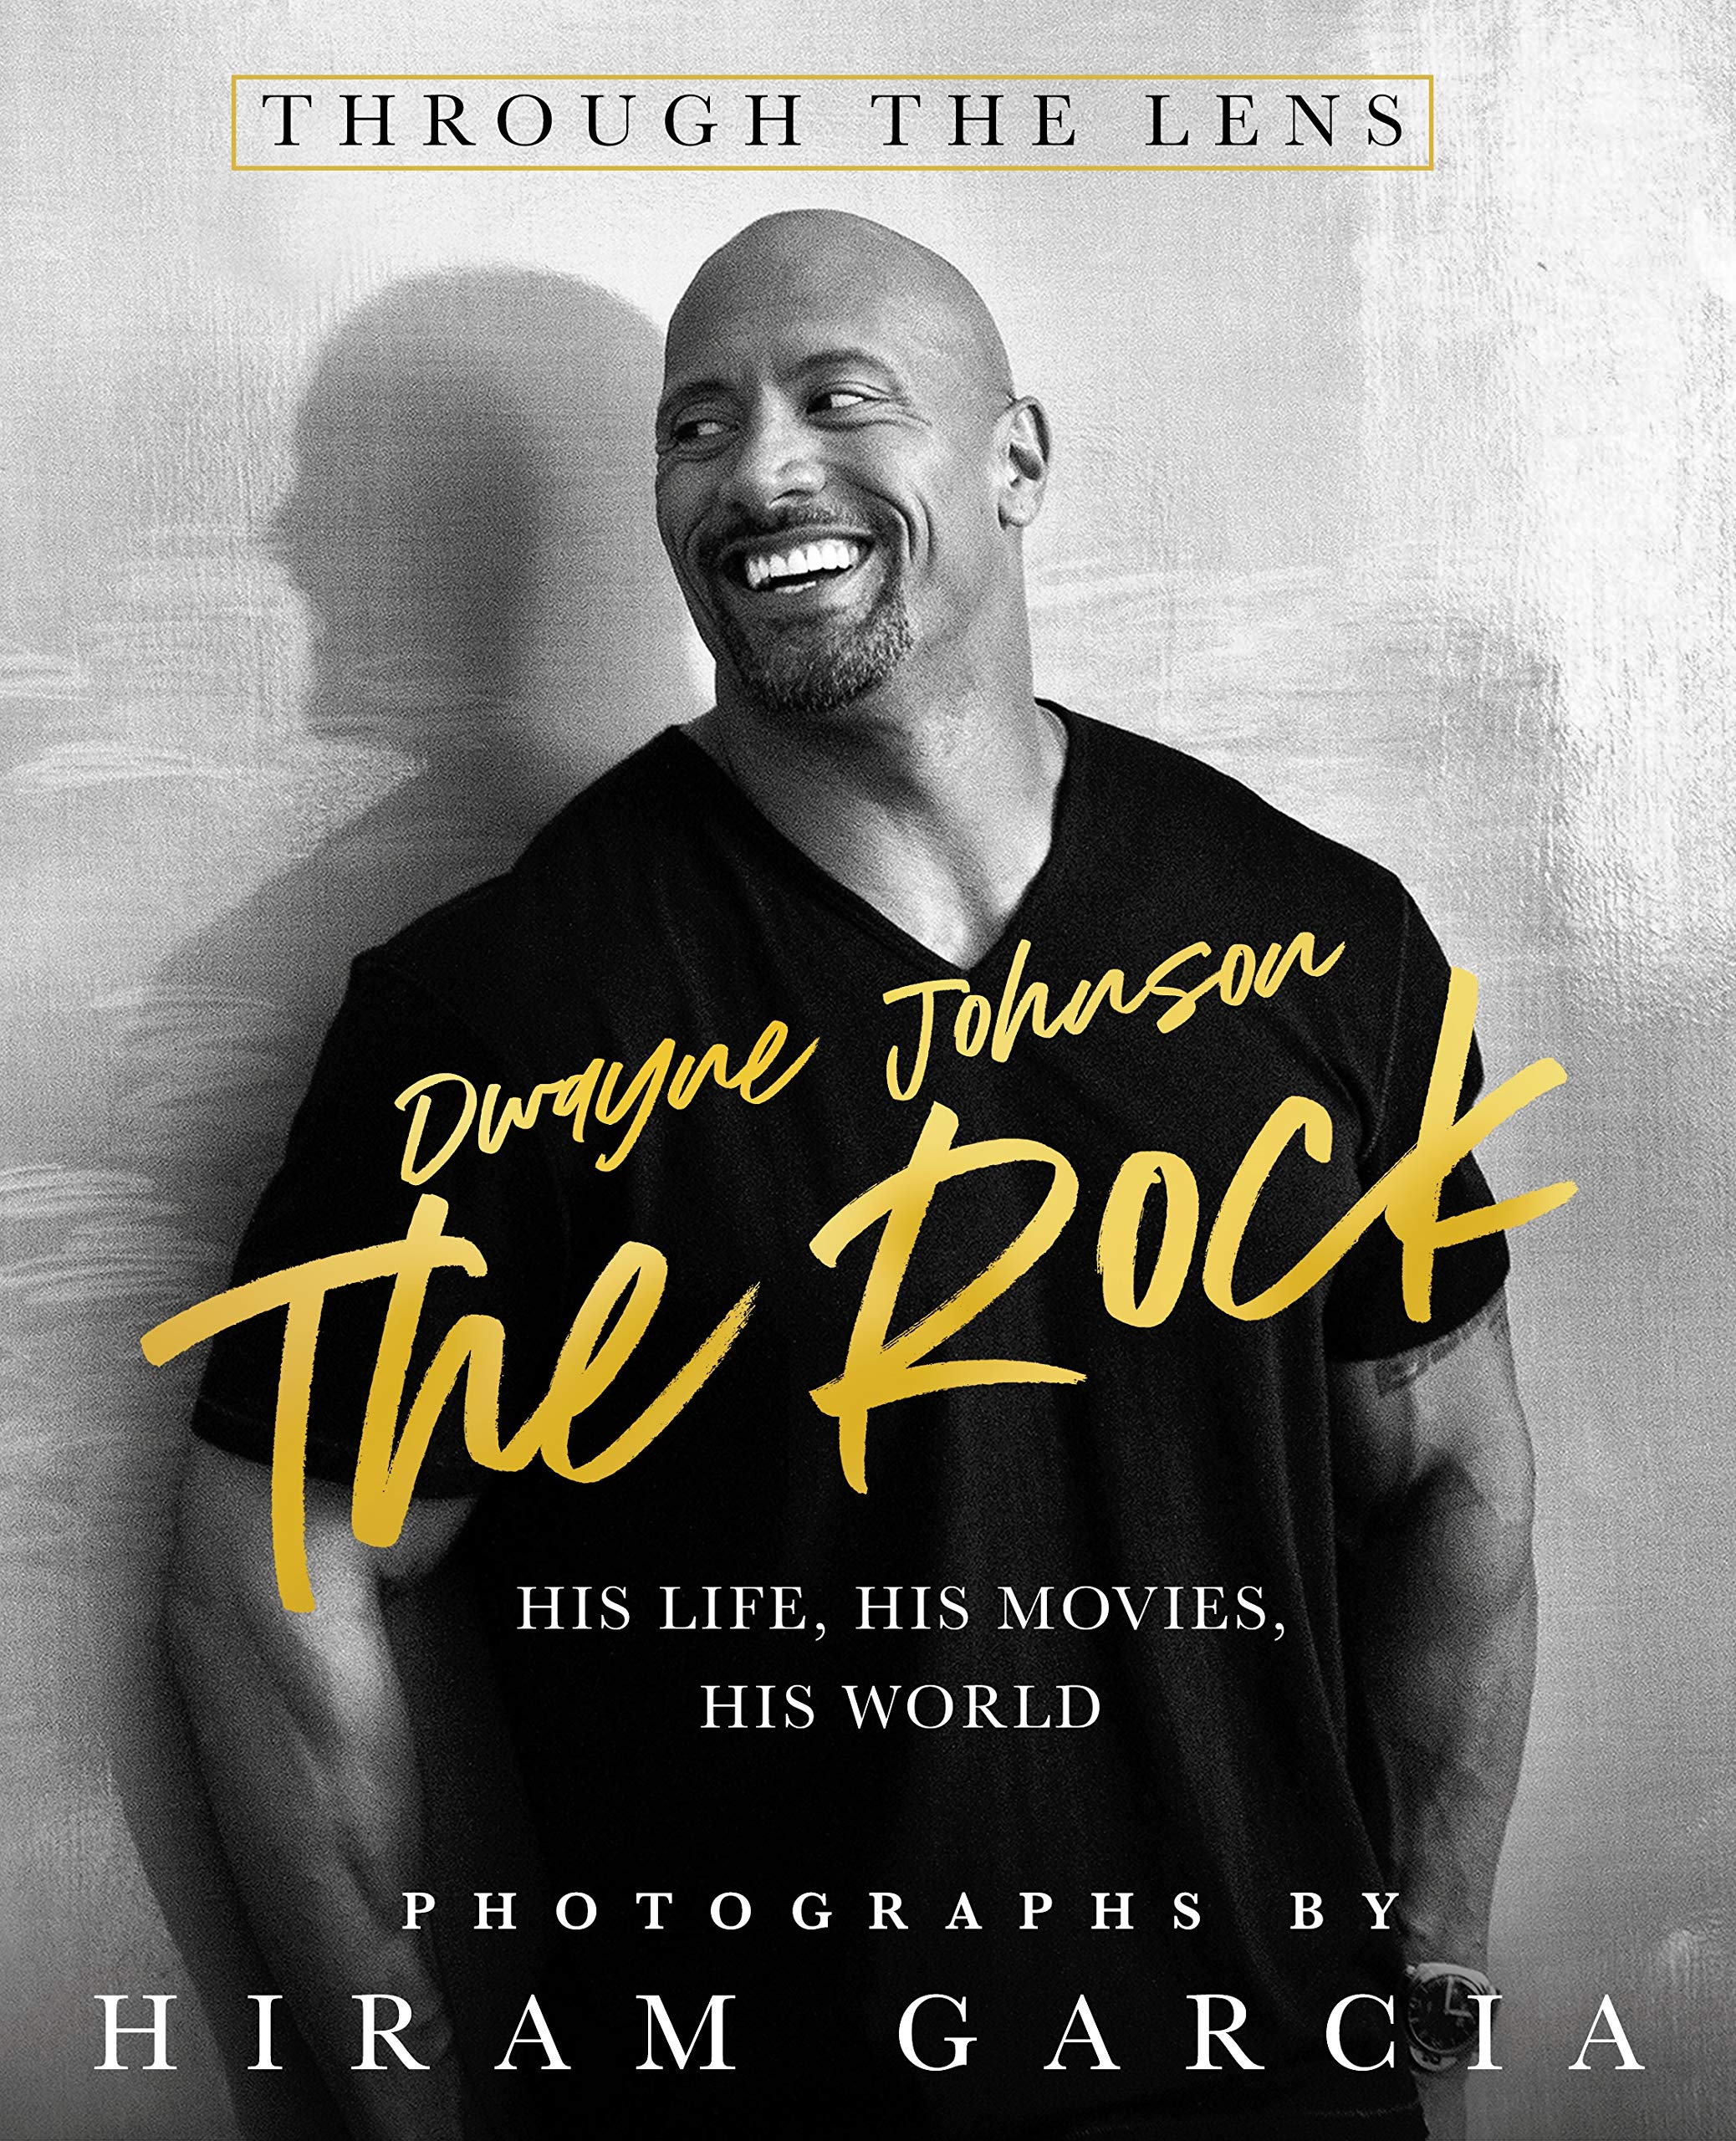 The Rock: Through the Lens: His Life, His Movies, His World Hardcover by Hiram Garcia